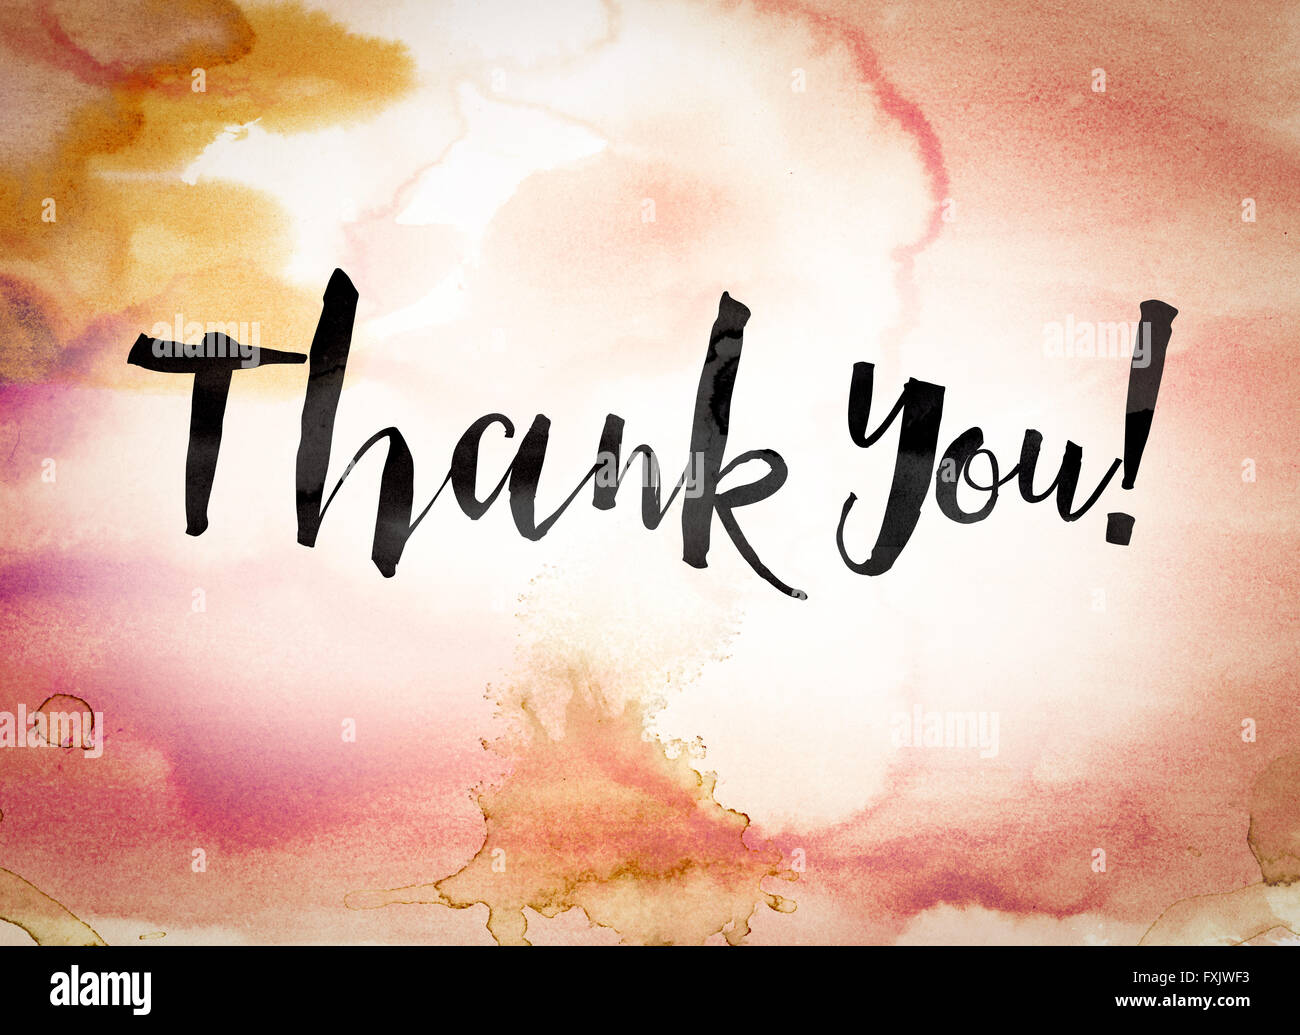 The word "Thank you" written in black paint on a colorful watercolor washed background. Stock Photo